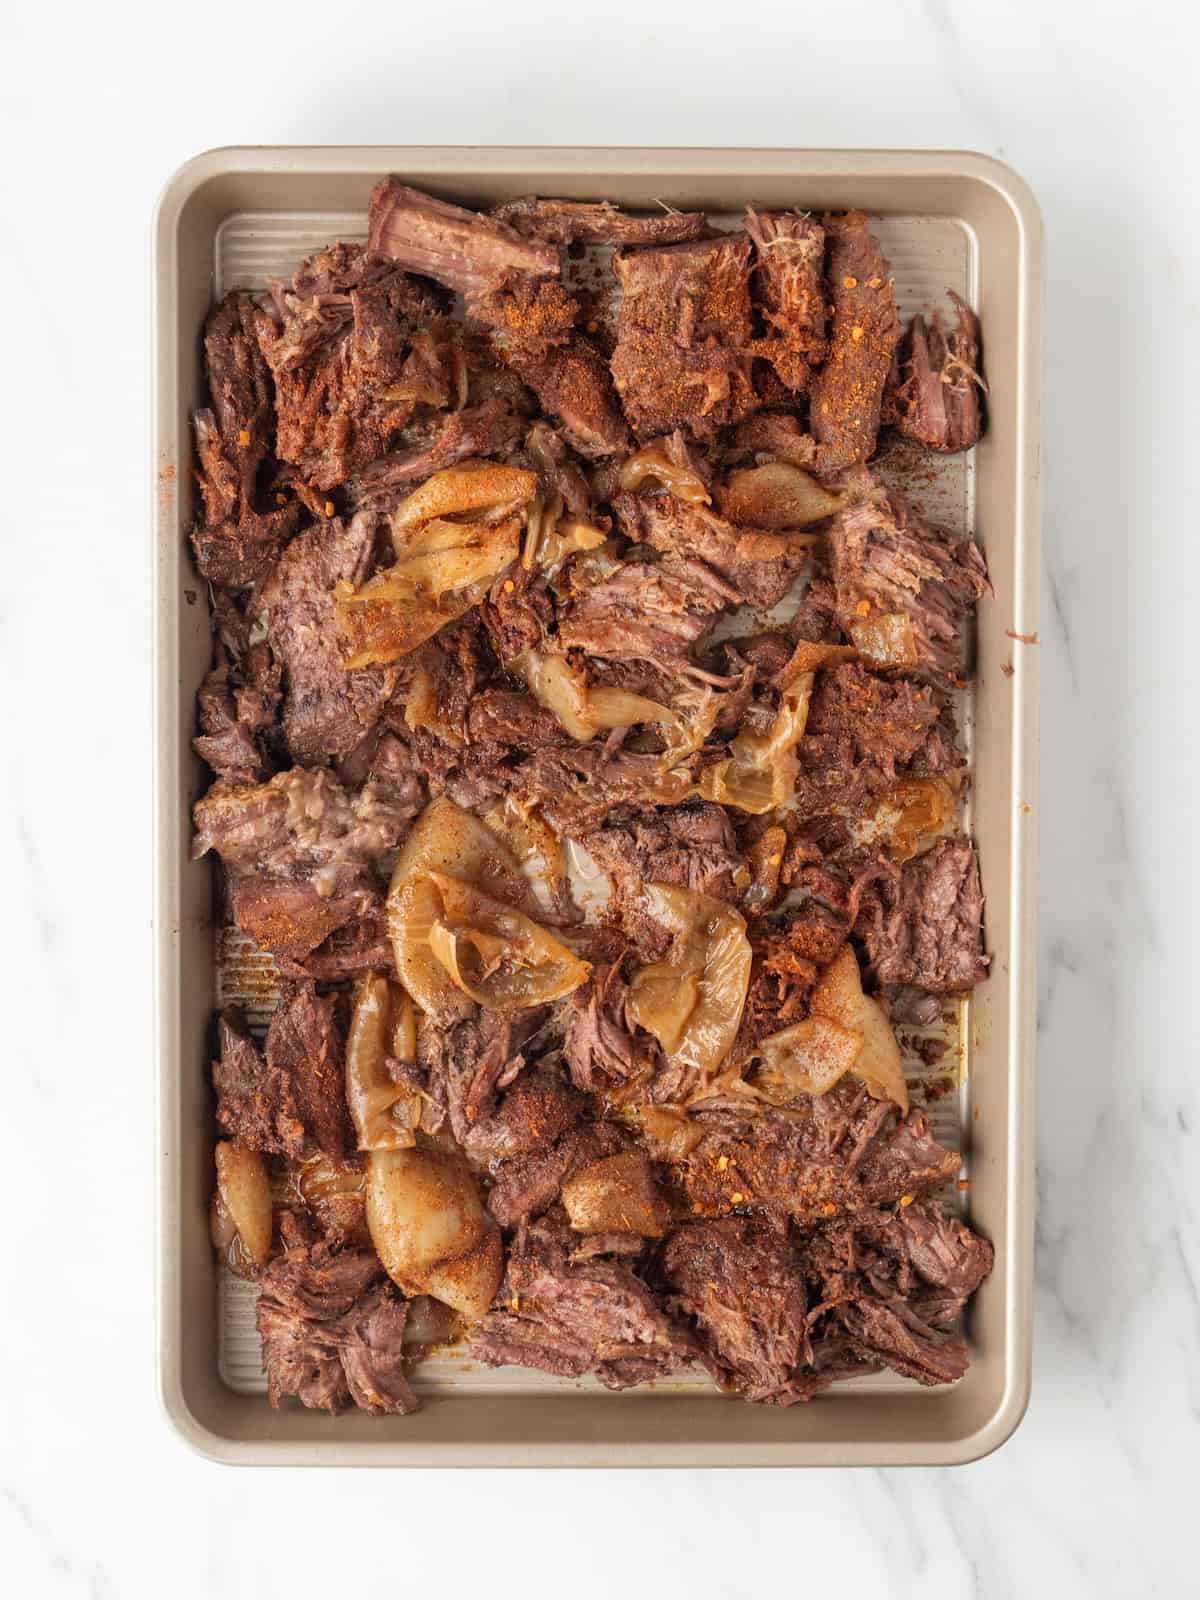 A baking sheet with shredded cooked chuck roast, and onions it cooked with.